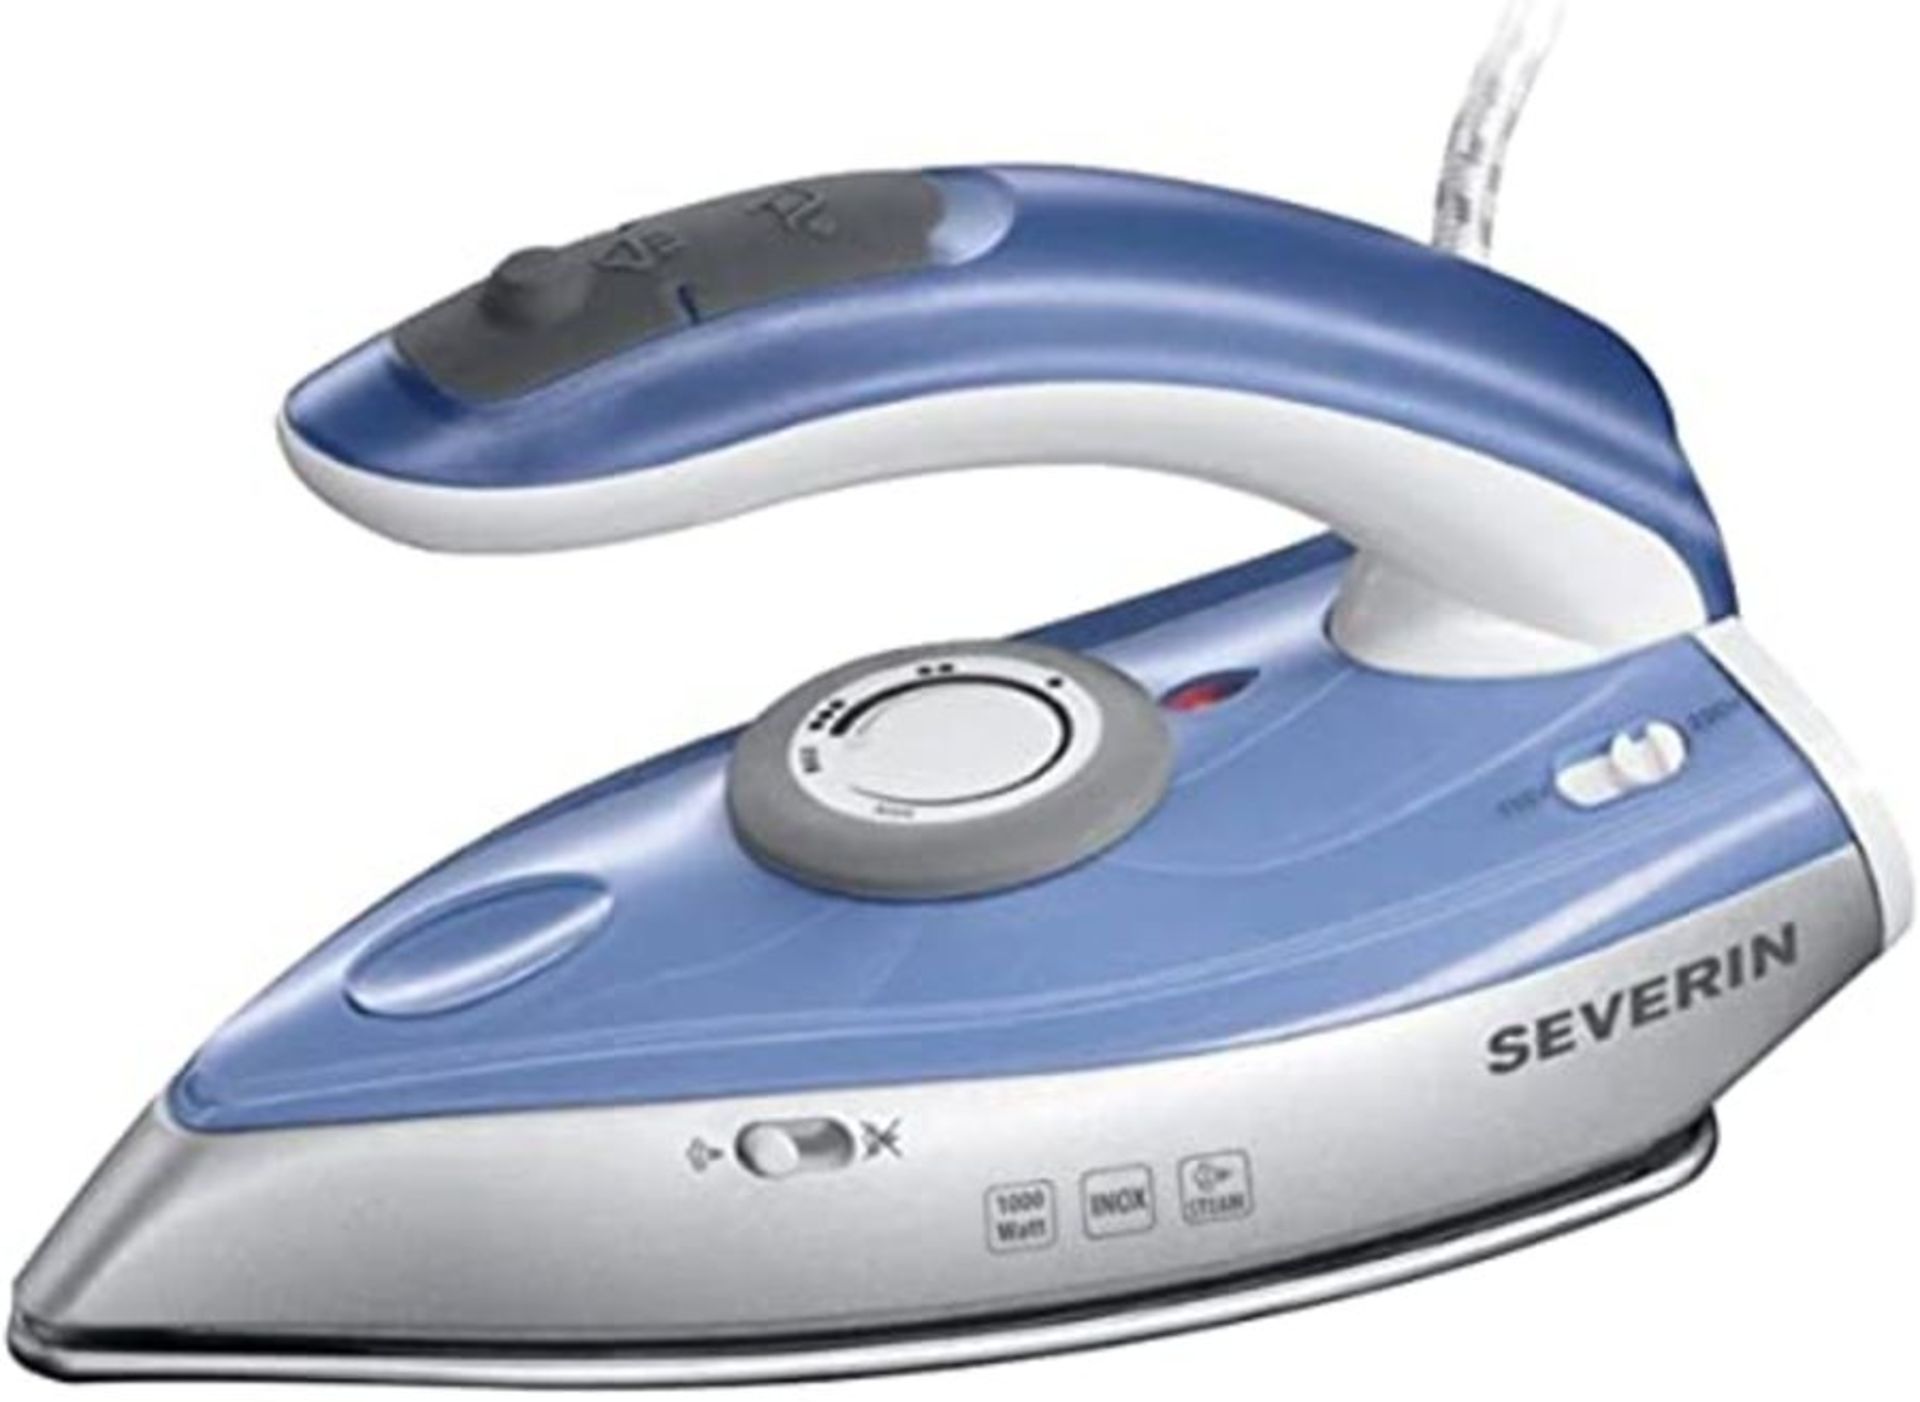 SEVERIN Travel STEAM Iron BA 3234 / Silver - Blue, 1000W, 50ml Water Tank and Foldable